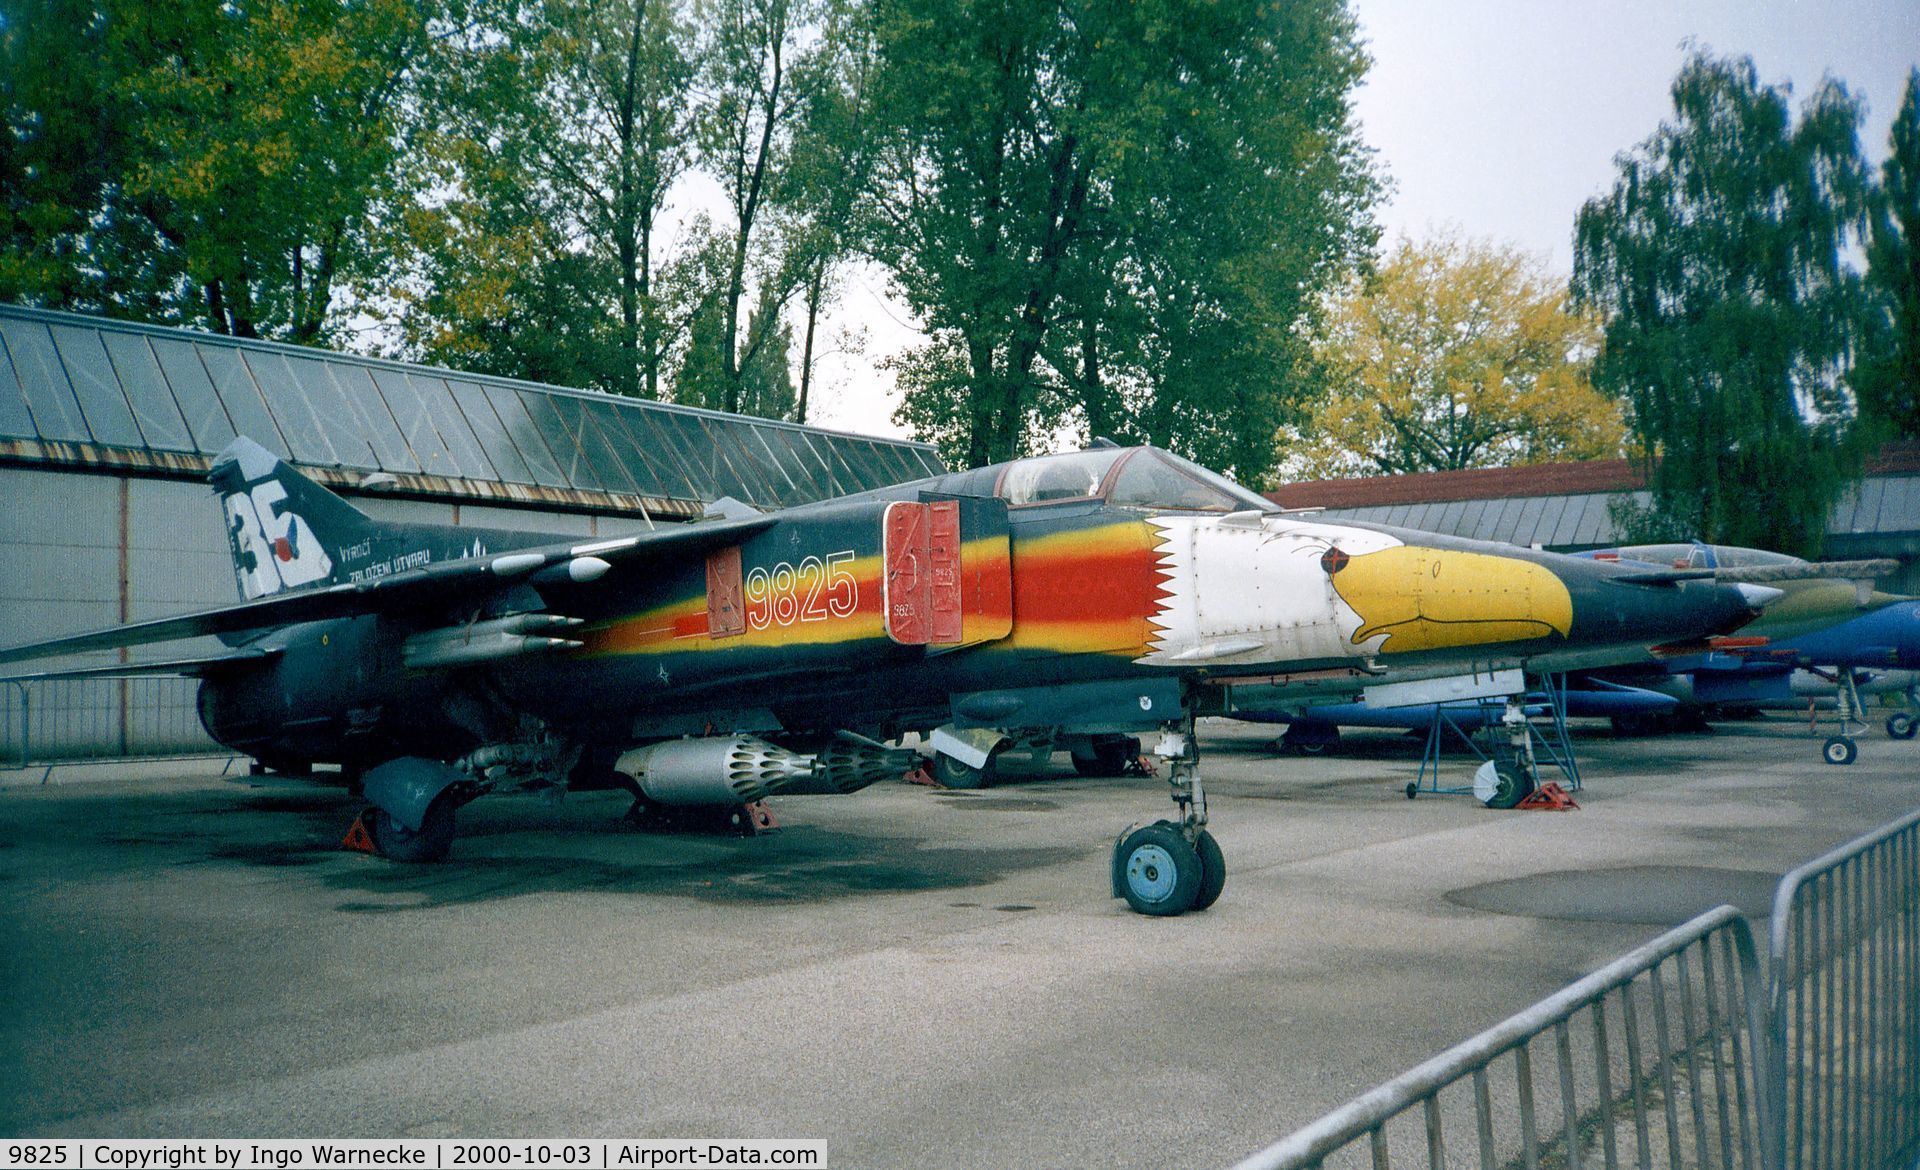 9825, 1982 Mikoyan-Gurevich MiG-23BN C/N 0393219825, Mikoyan i Gurevich MiG-23BN Flogger-H of the czechoslovak air force at the Letecke Muzeum, Prague-Kbely